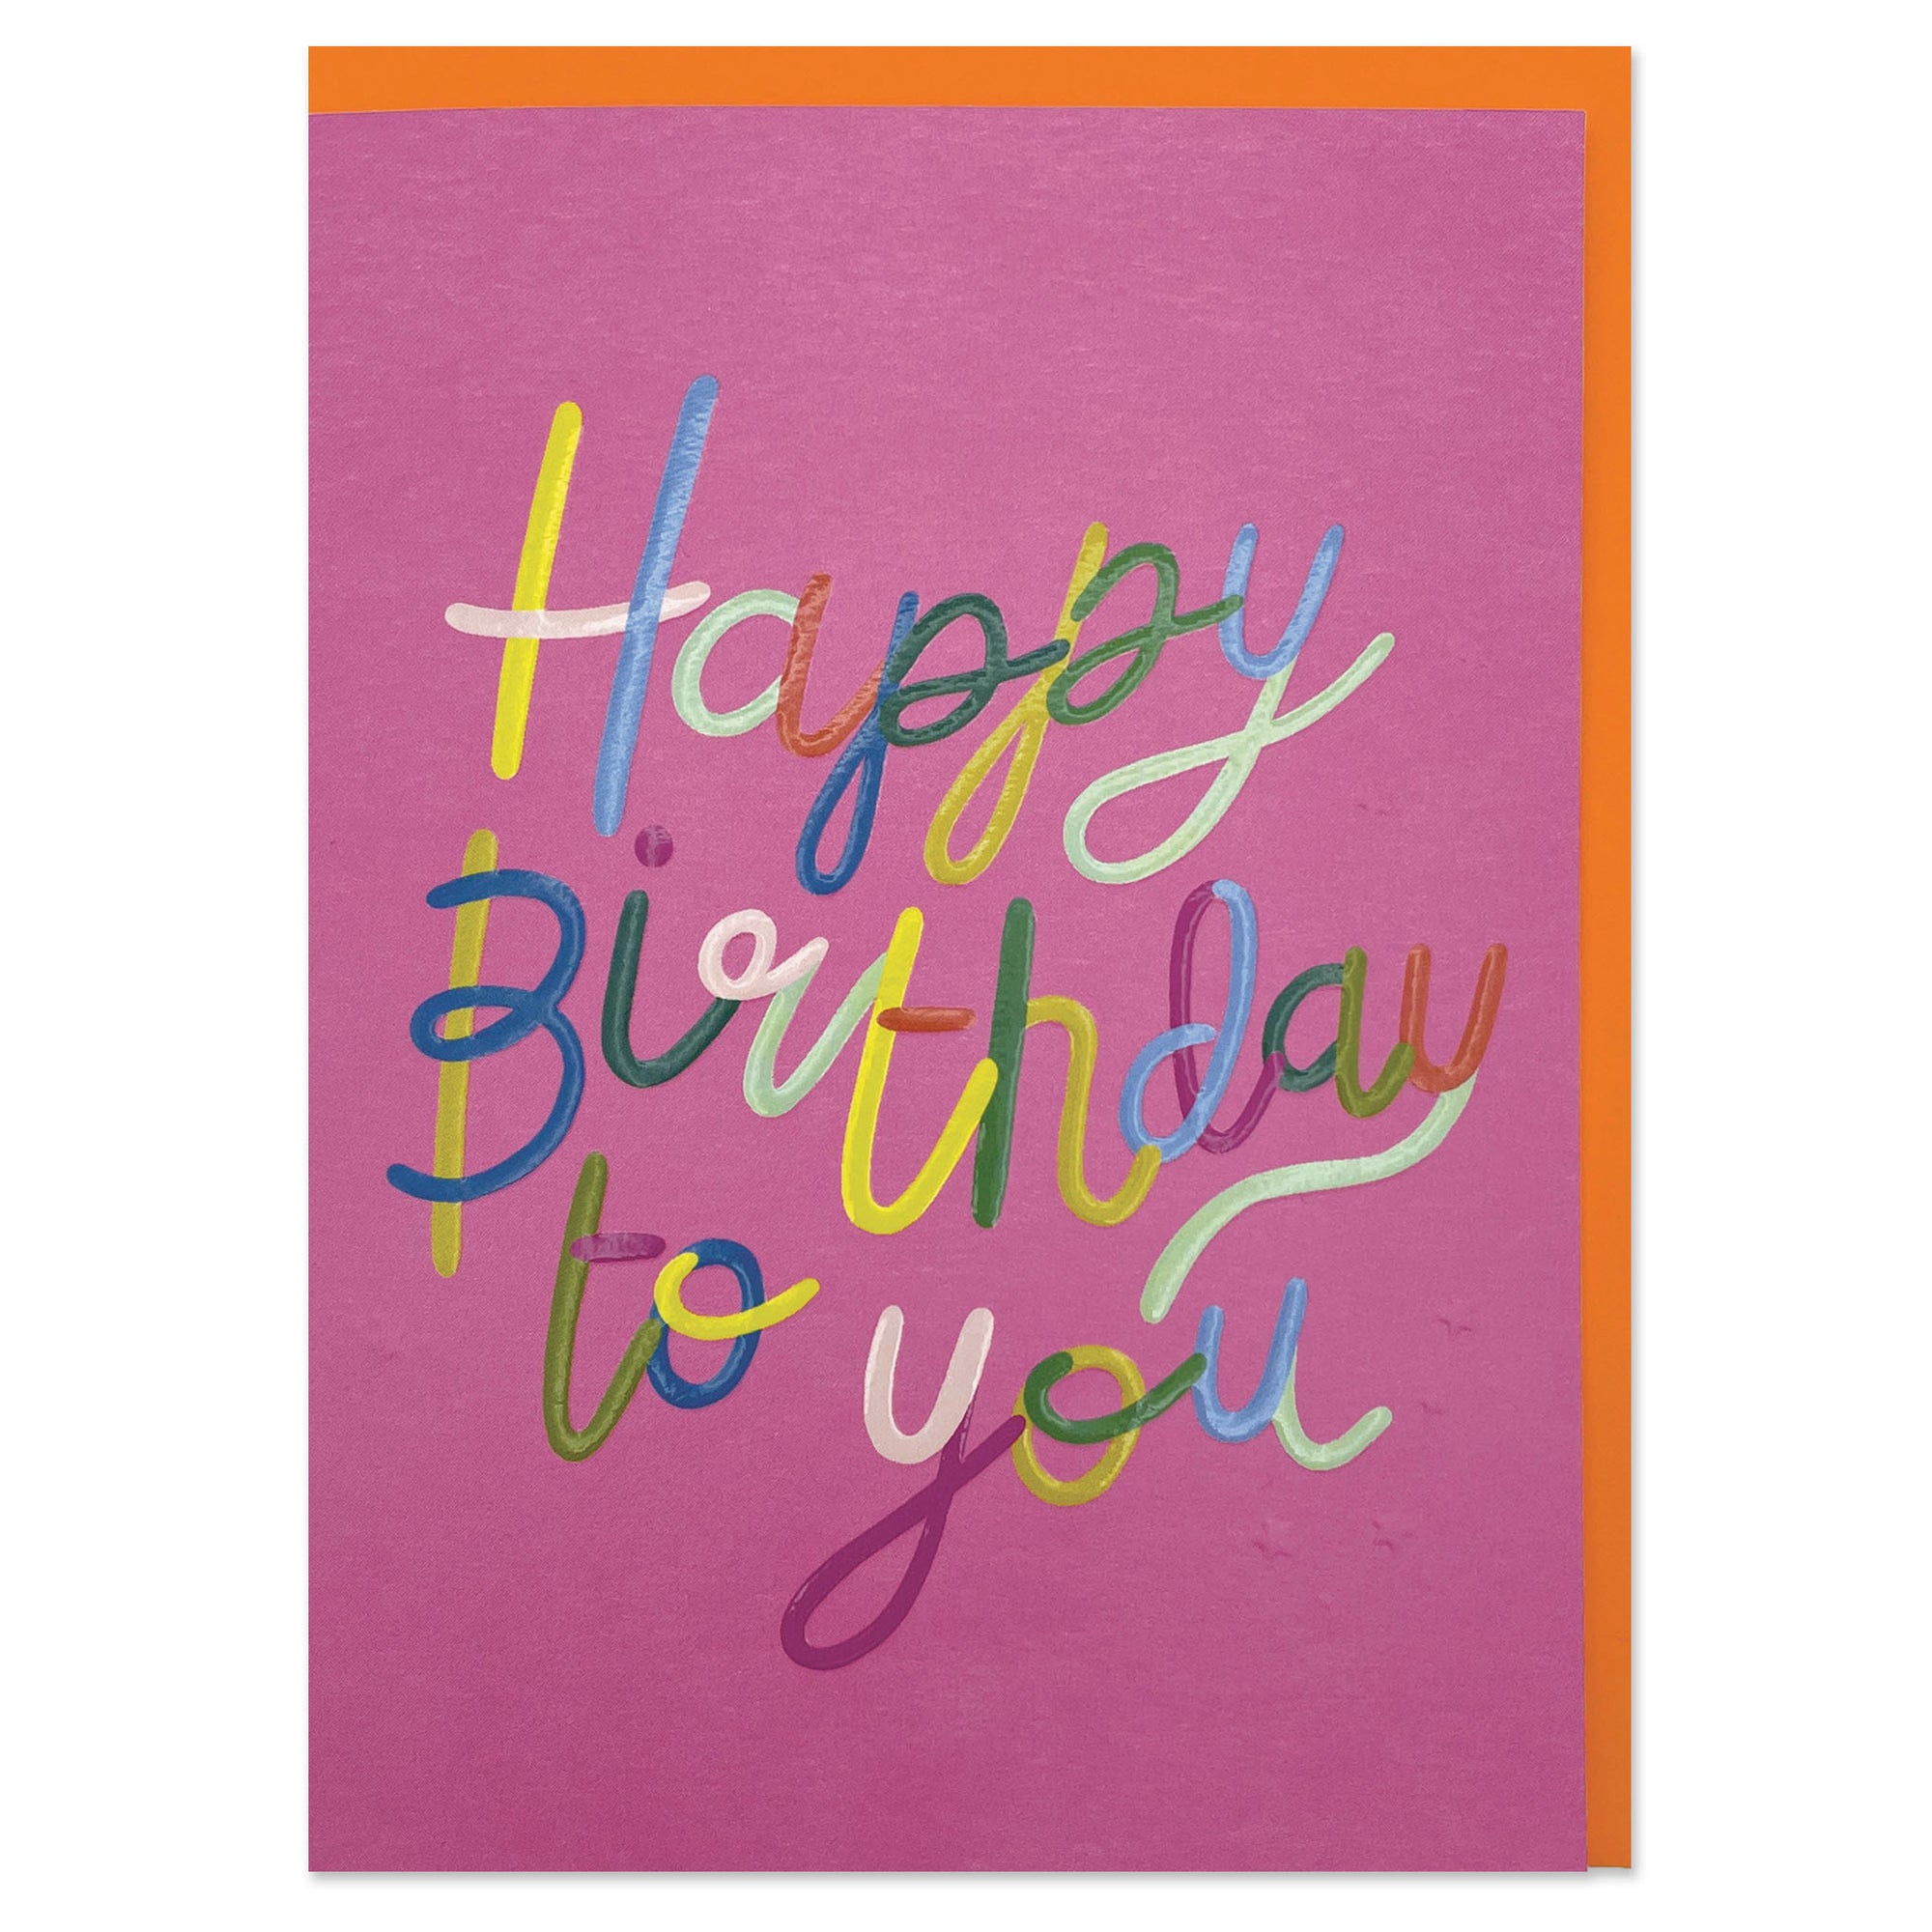 A colourful greetings card to celebrate a birthday where the main colour is hot pink. The wording on the card is 'Happy Birthday to you' in big cursive style wrting. Each part of each letter is a different colour.